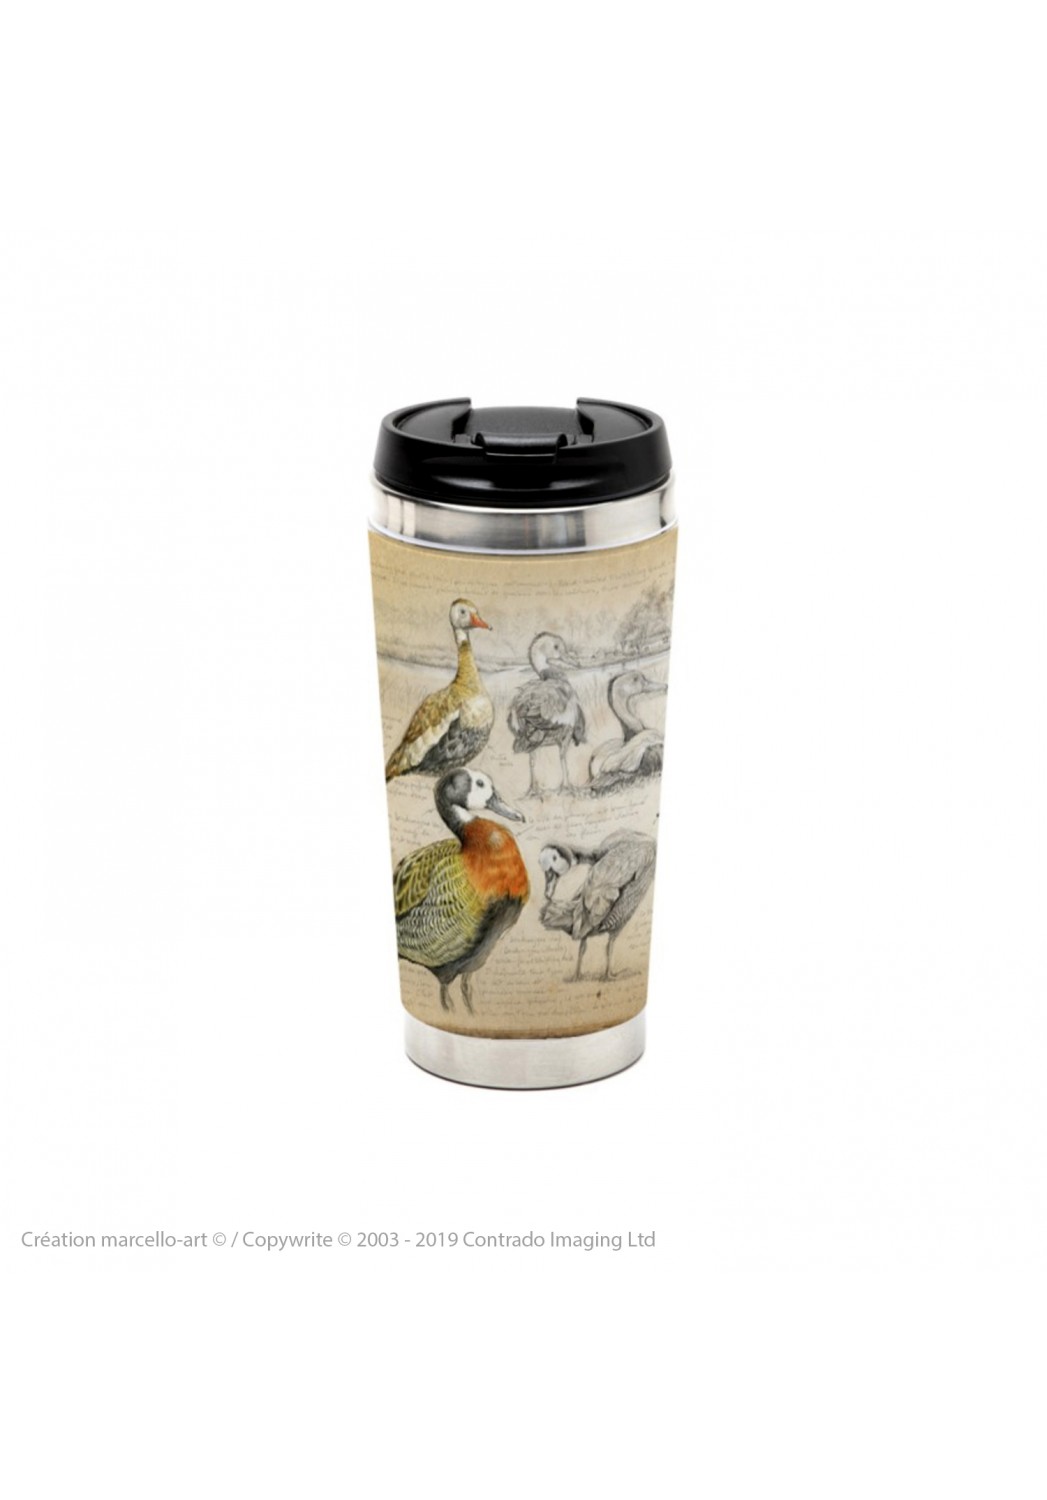 Marcello-art: Decoration accessoiries Thermos mug 237 Whistling Duck